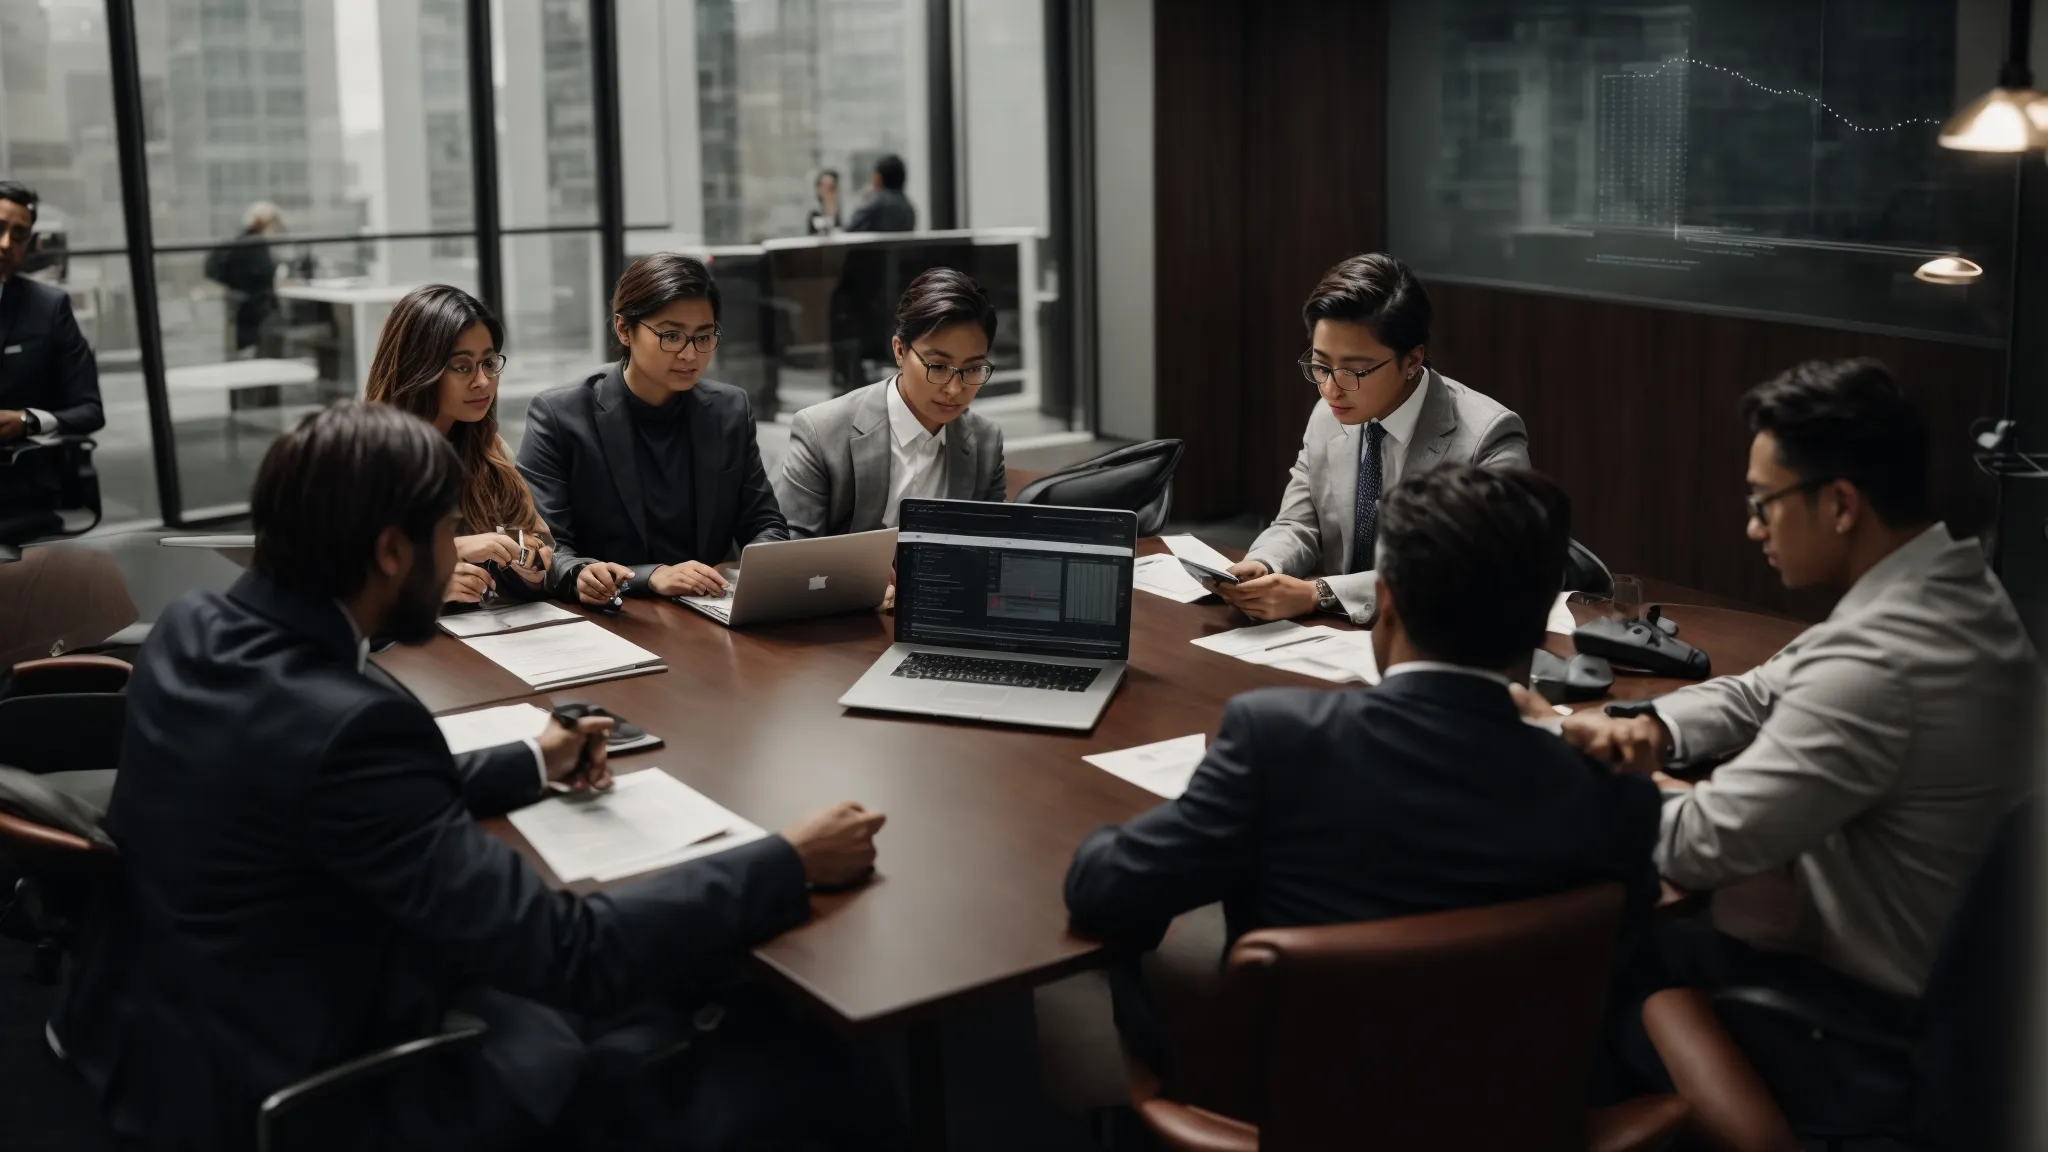 a group of professionals gathered around a conference table discussing documents and graphs on their laptops.